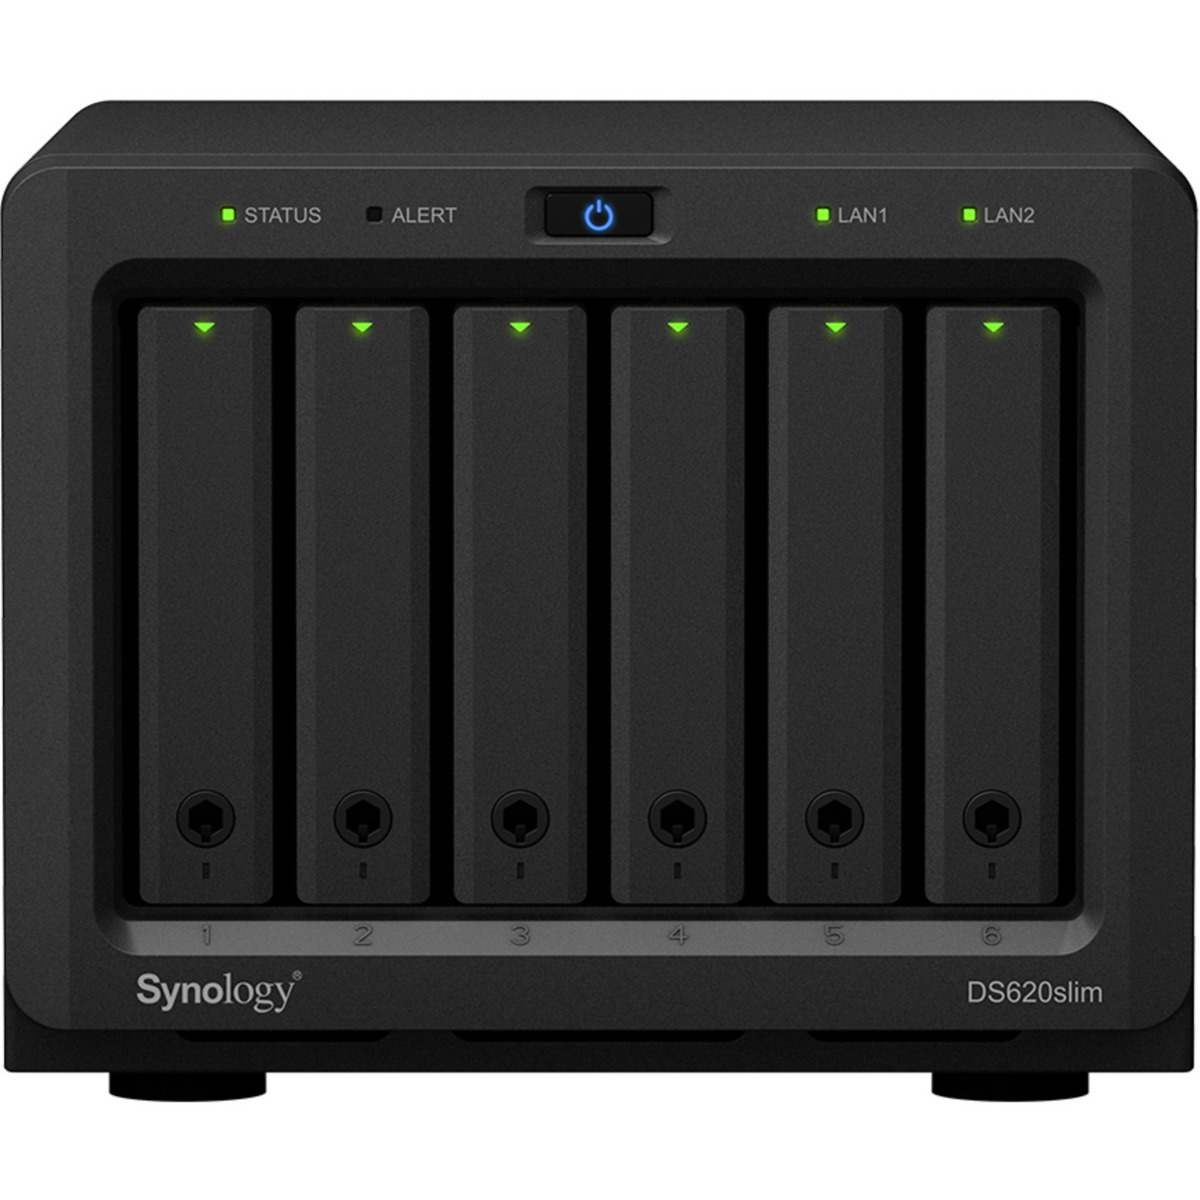 Synology DiskStation DS620slim 10tb 6-Bay Desktop Multimedia / Power User / Business NAS - Network Attached Storage Device 5x2tb Samsung 870 QVO MZ-77Q2T0 2.5 560/530MB/s SATA 6Gb/s SSD CONSUMER Class Drives Installed - Burn-In Tested - FREE RAM UPGRADE DiskStation DS620slim